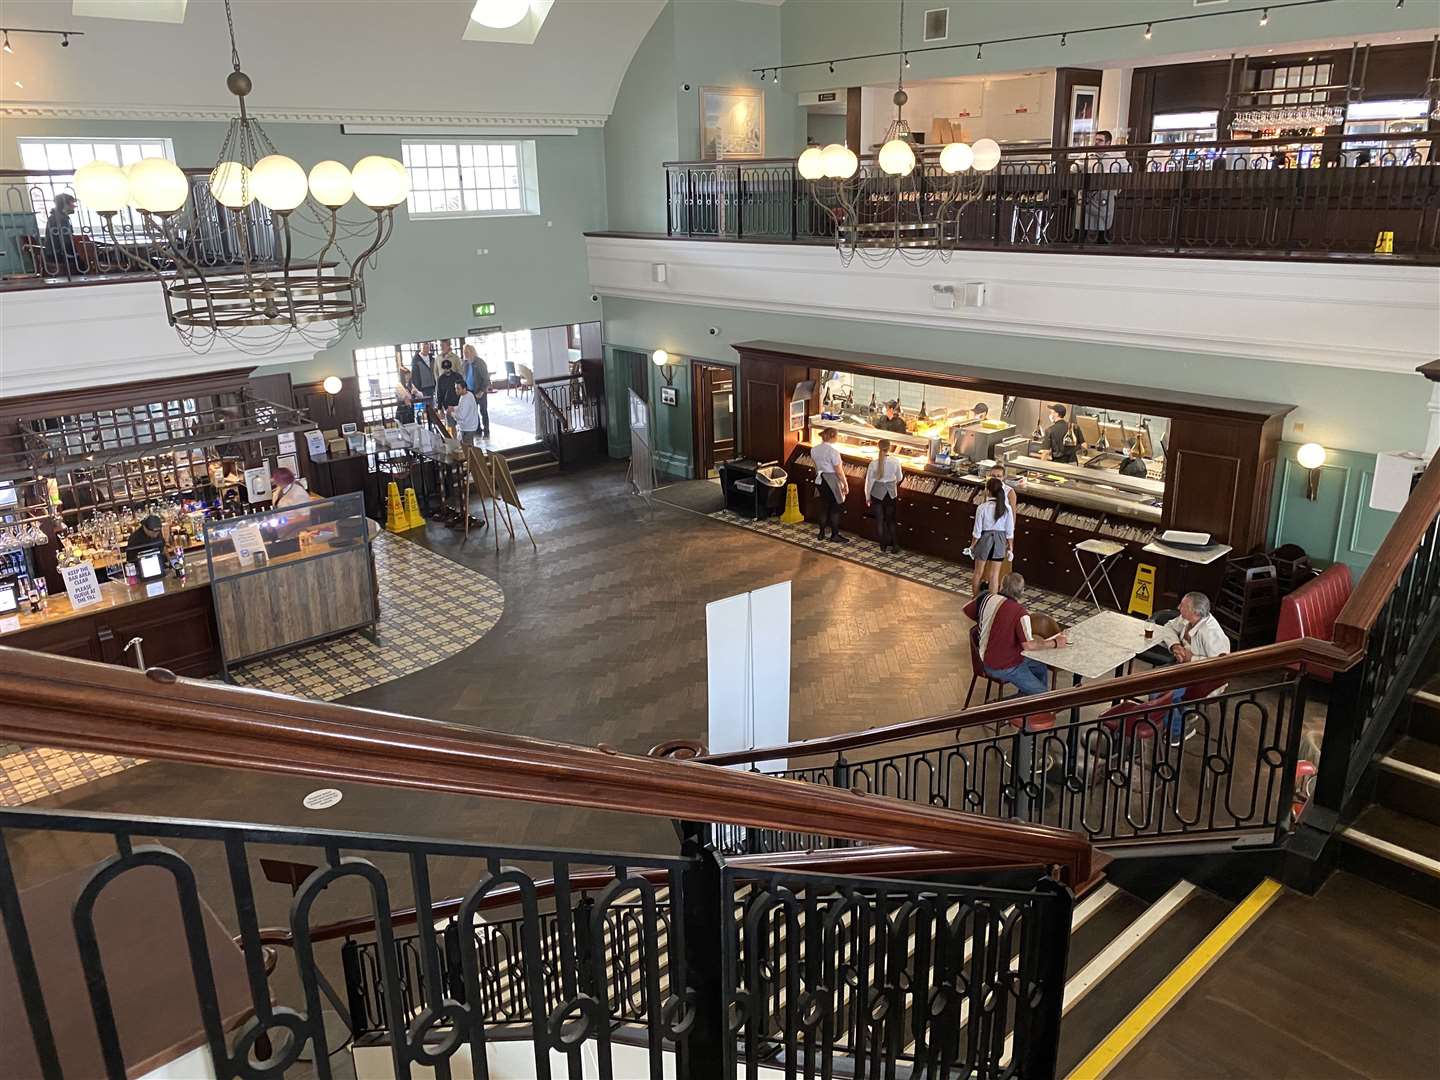 The Wetherspoon pub Royal Victoria Pavilion in Ramsgate has been closed